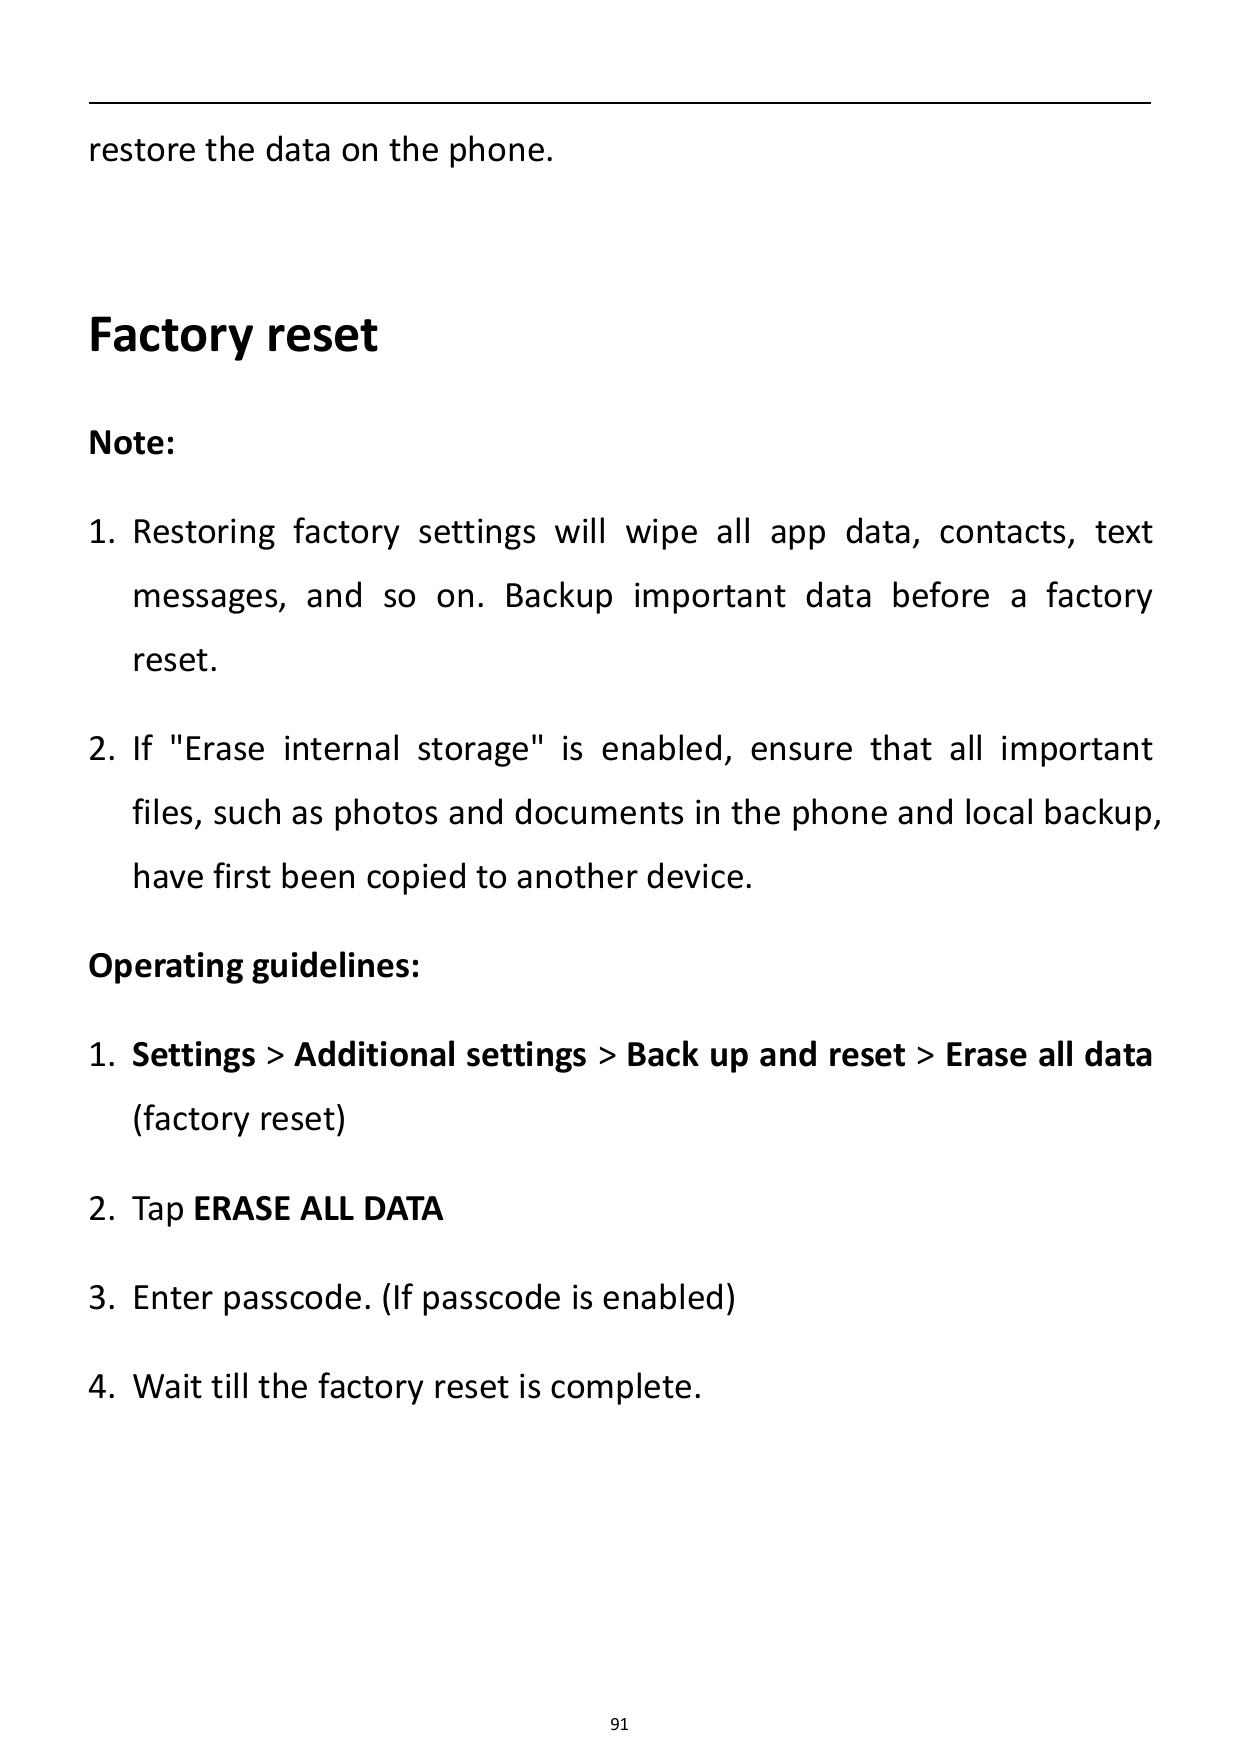 restore the data on the phone.Factory resetNote:1. Restoring factory settings will wipe all app data, contacts, textmessages, an